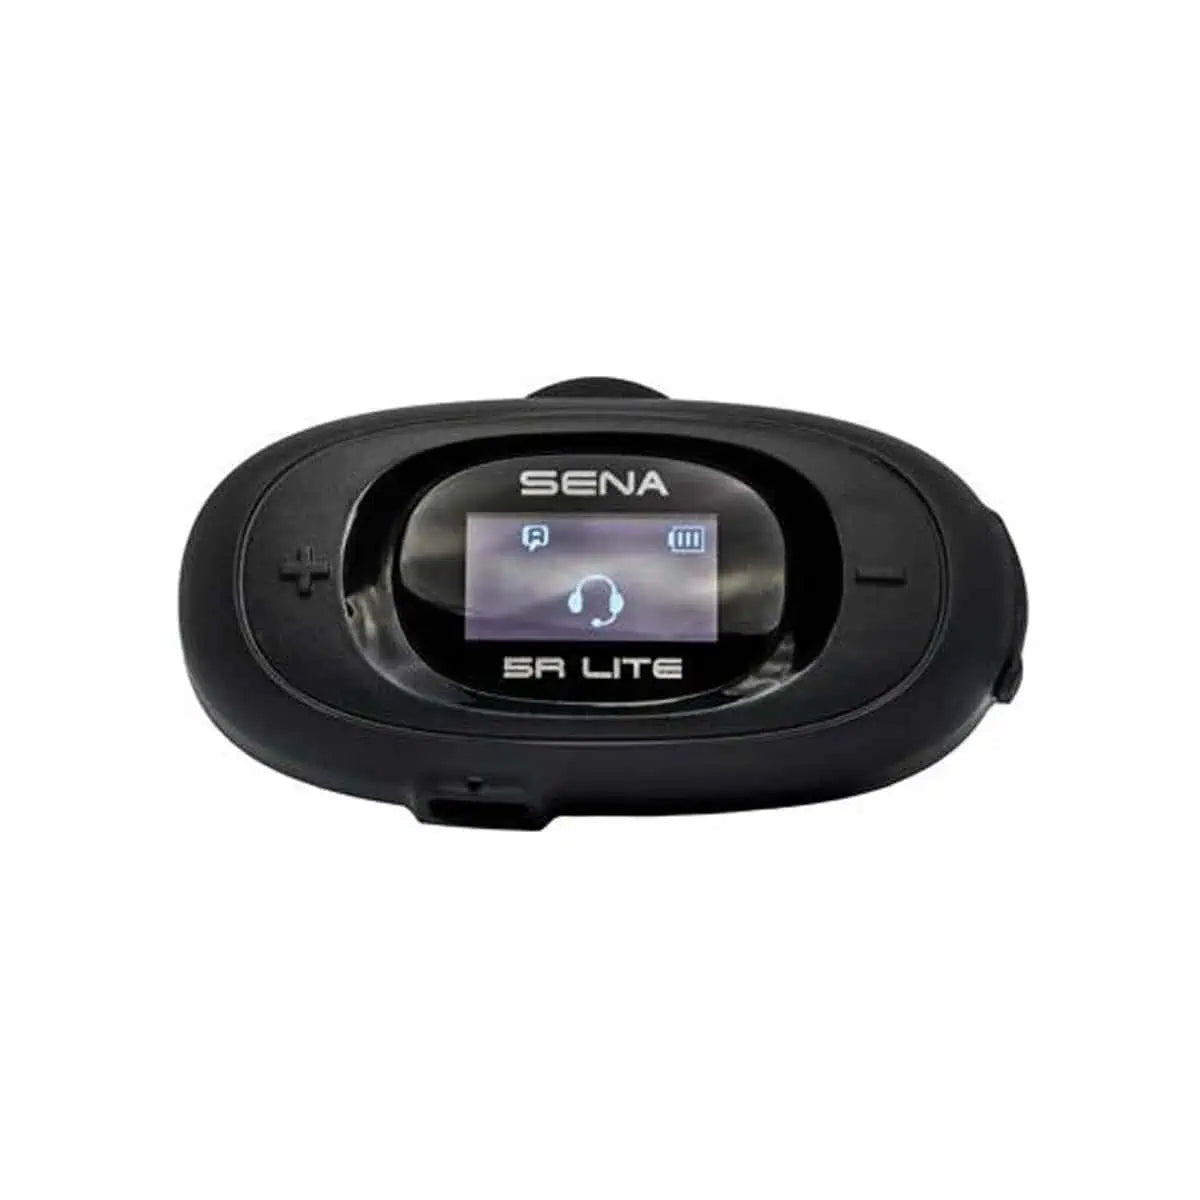 The Sena 5R Lite Bluetooth Headset: Sena's low profile price fighter with button controls